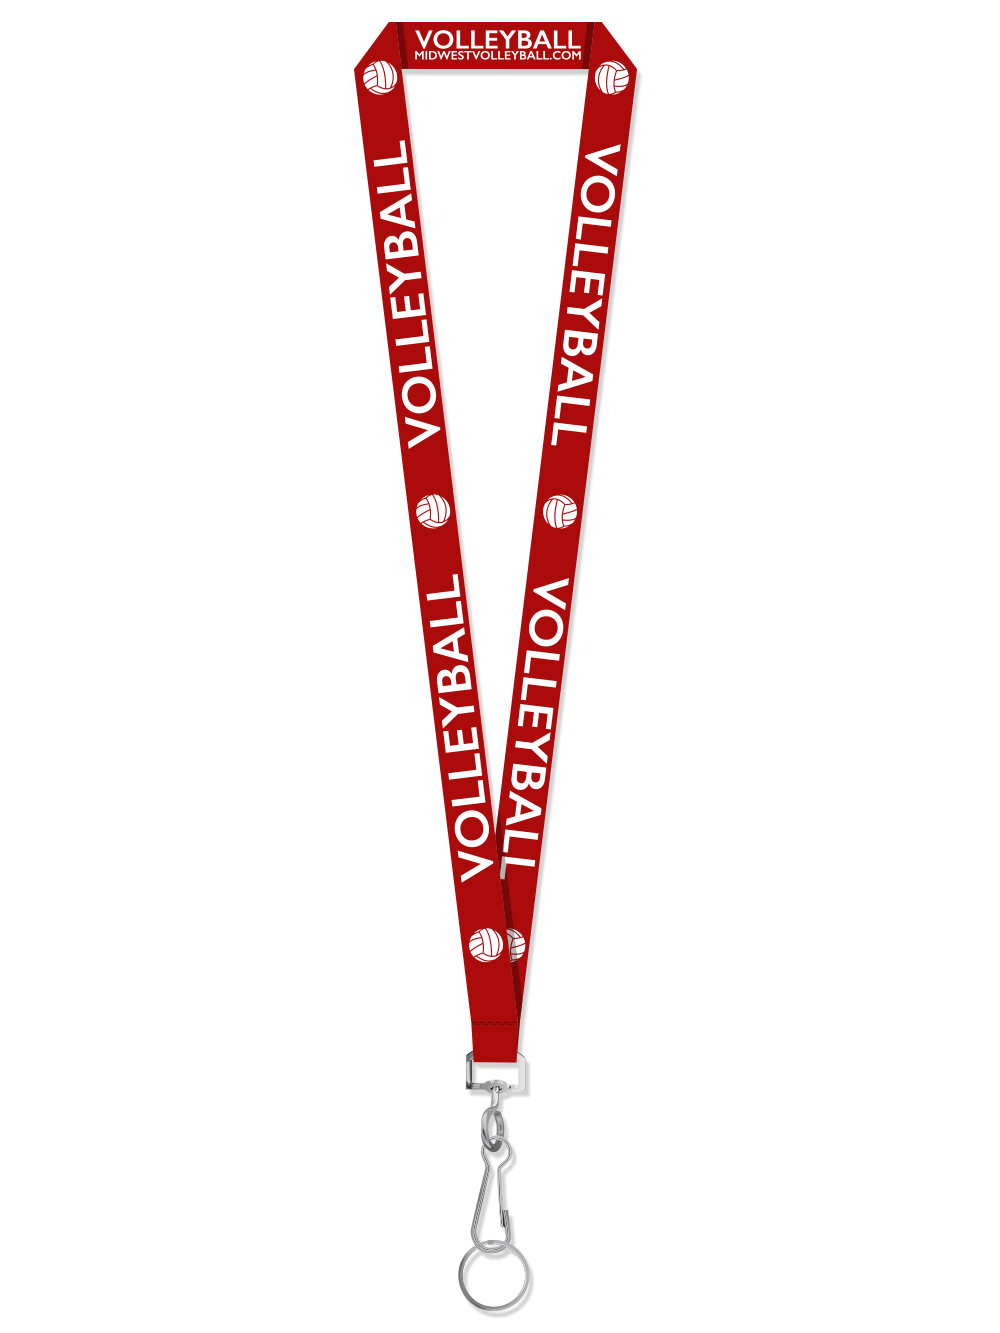 Amscan 397362 Volleyball Key Strap Lanyard Favors 8 Piece Multi